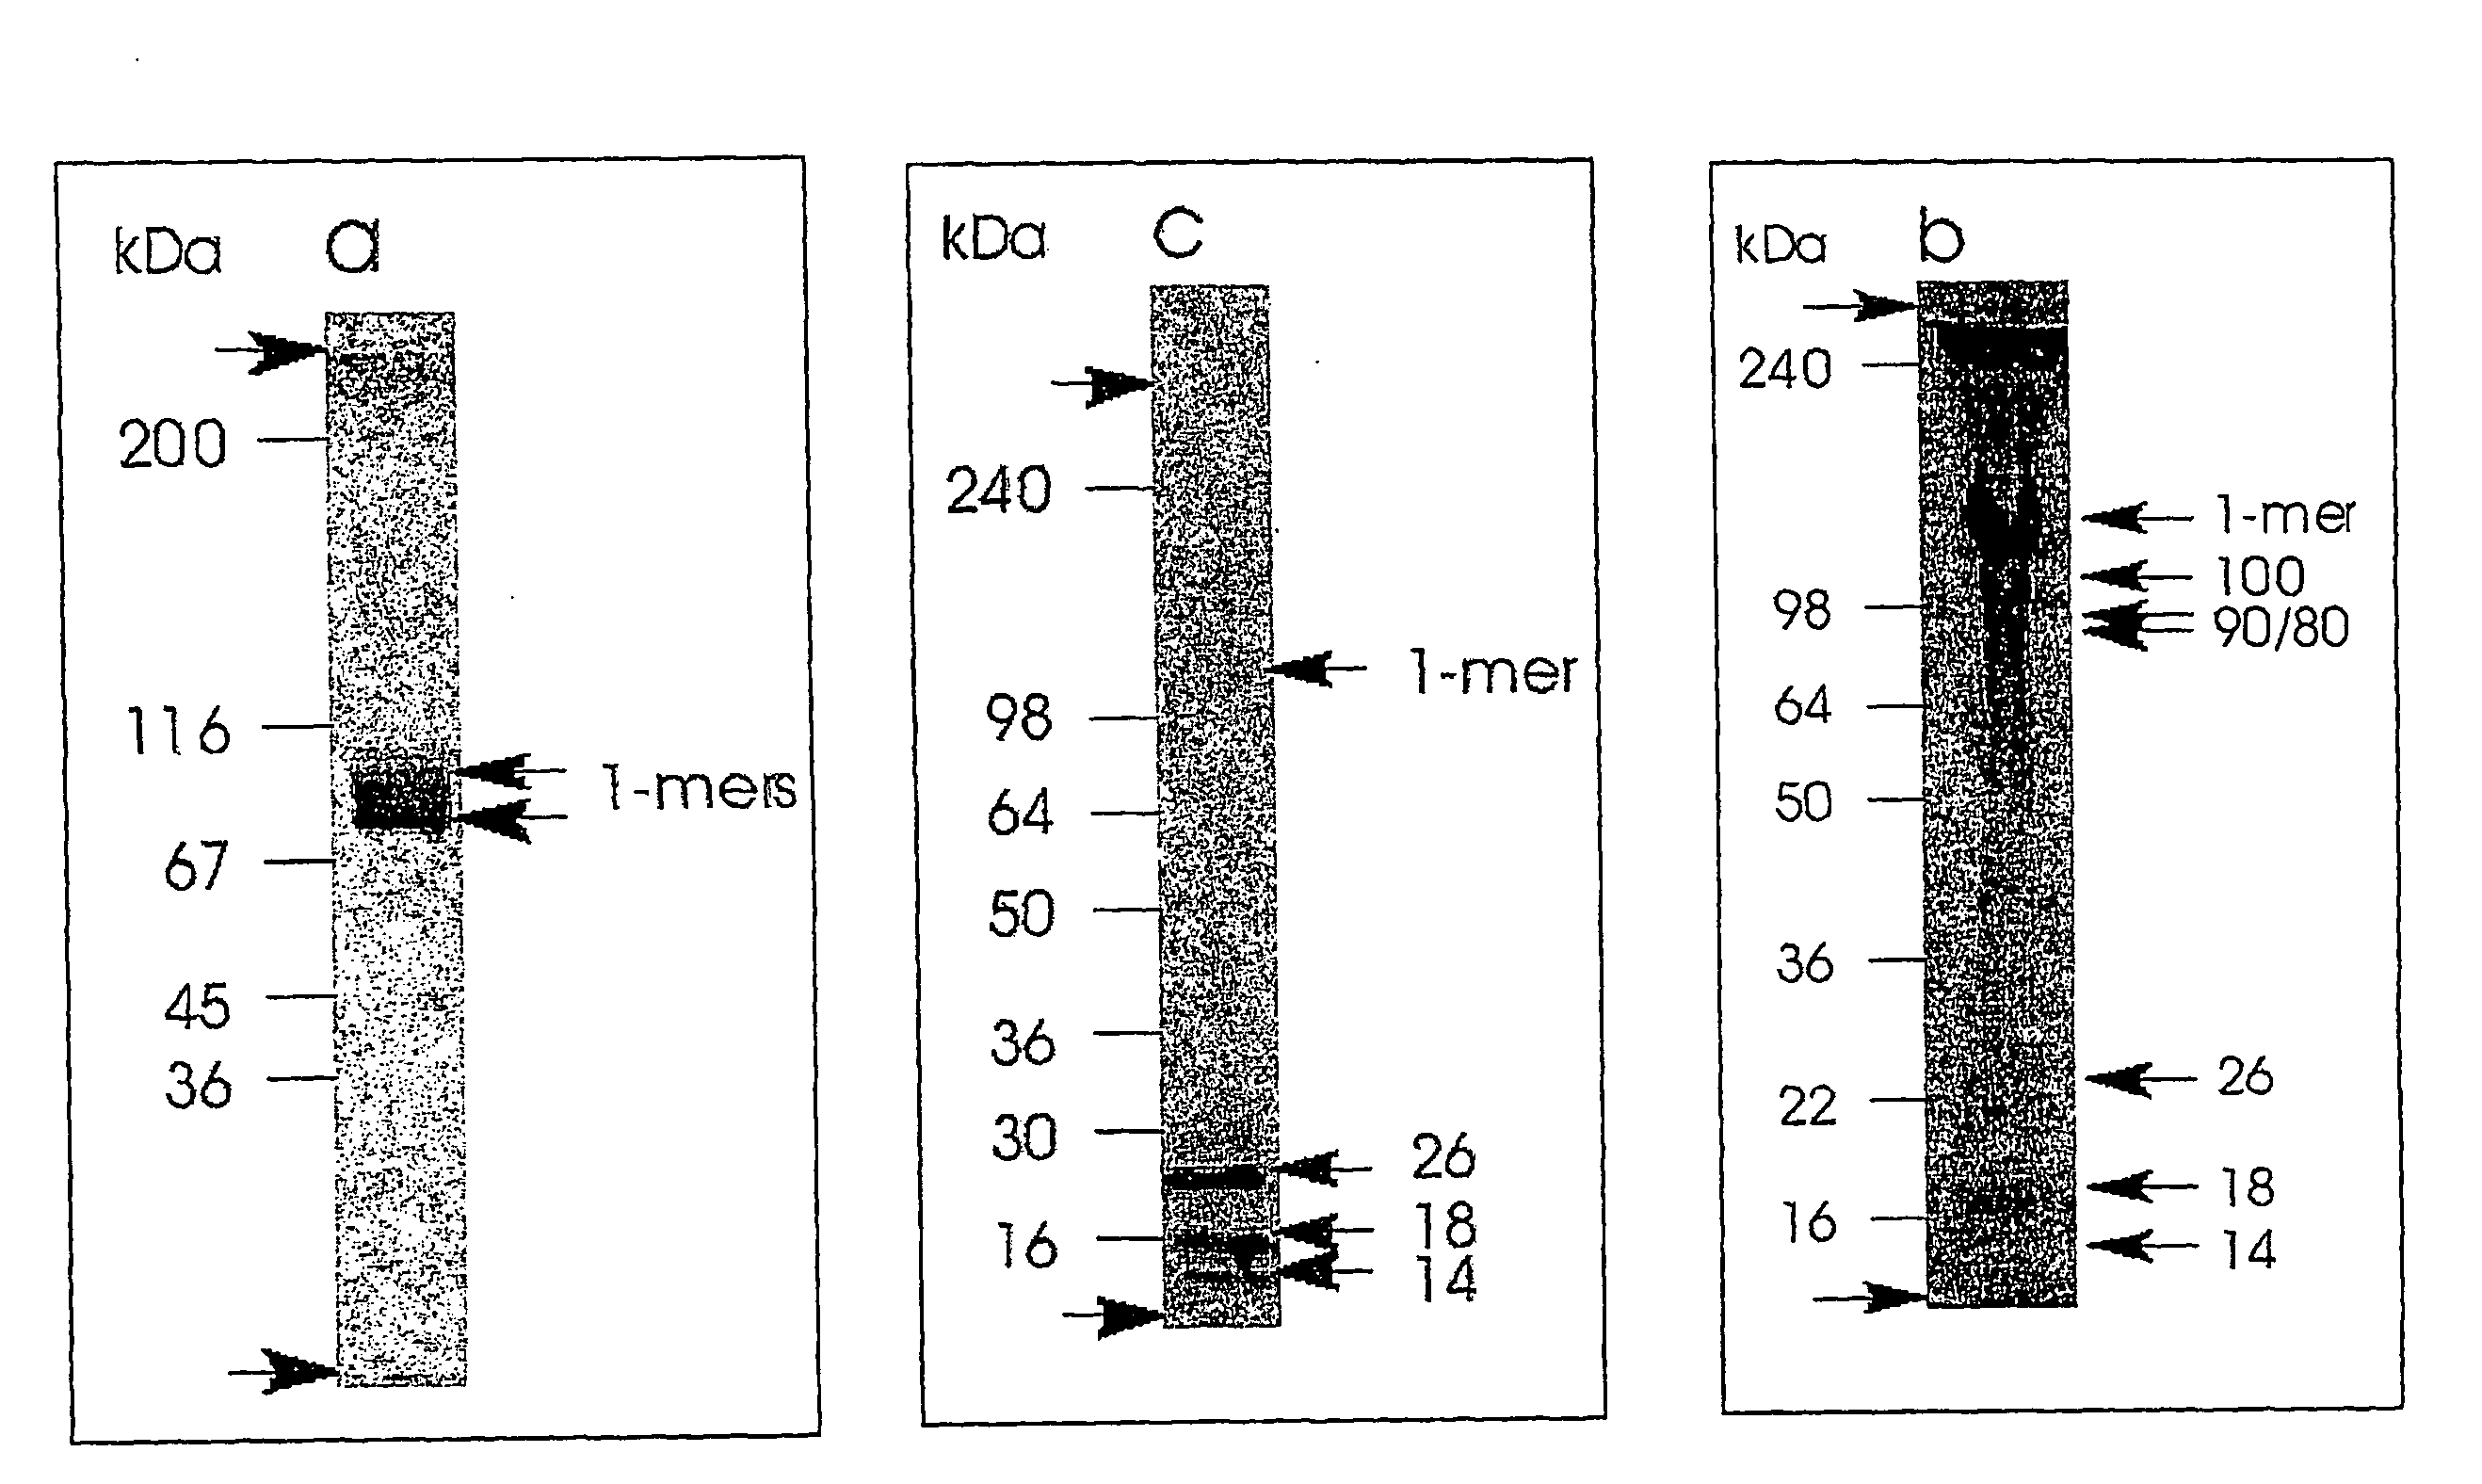 Method for Determining a Tissue Degradation Process by Detection of Comp Neoepitopes